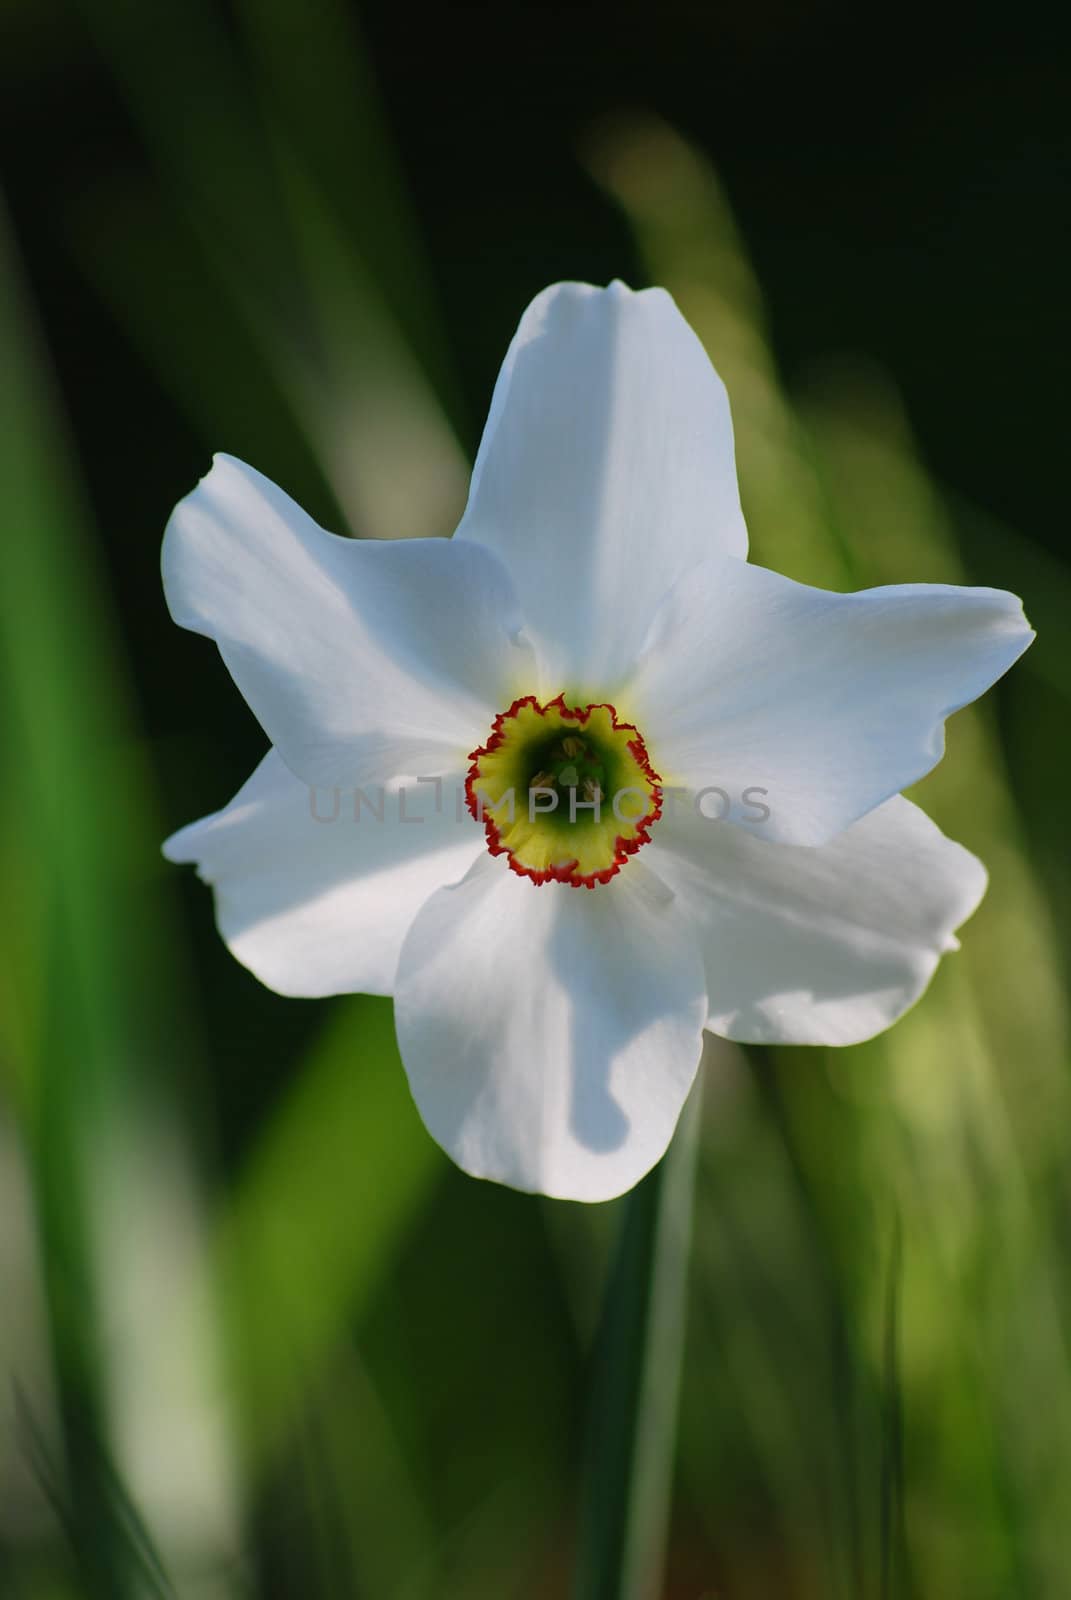 picture of a white narcissus